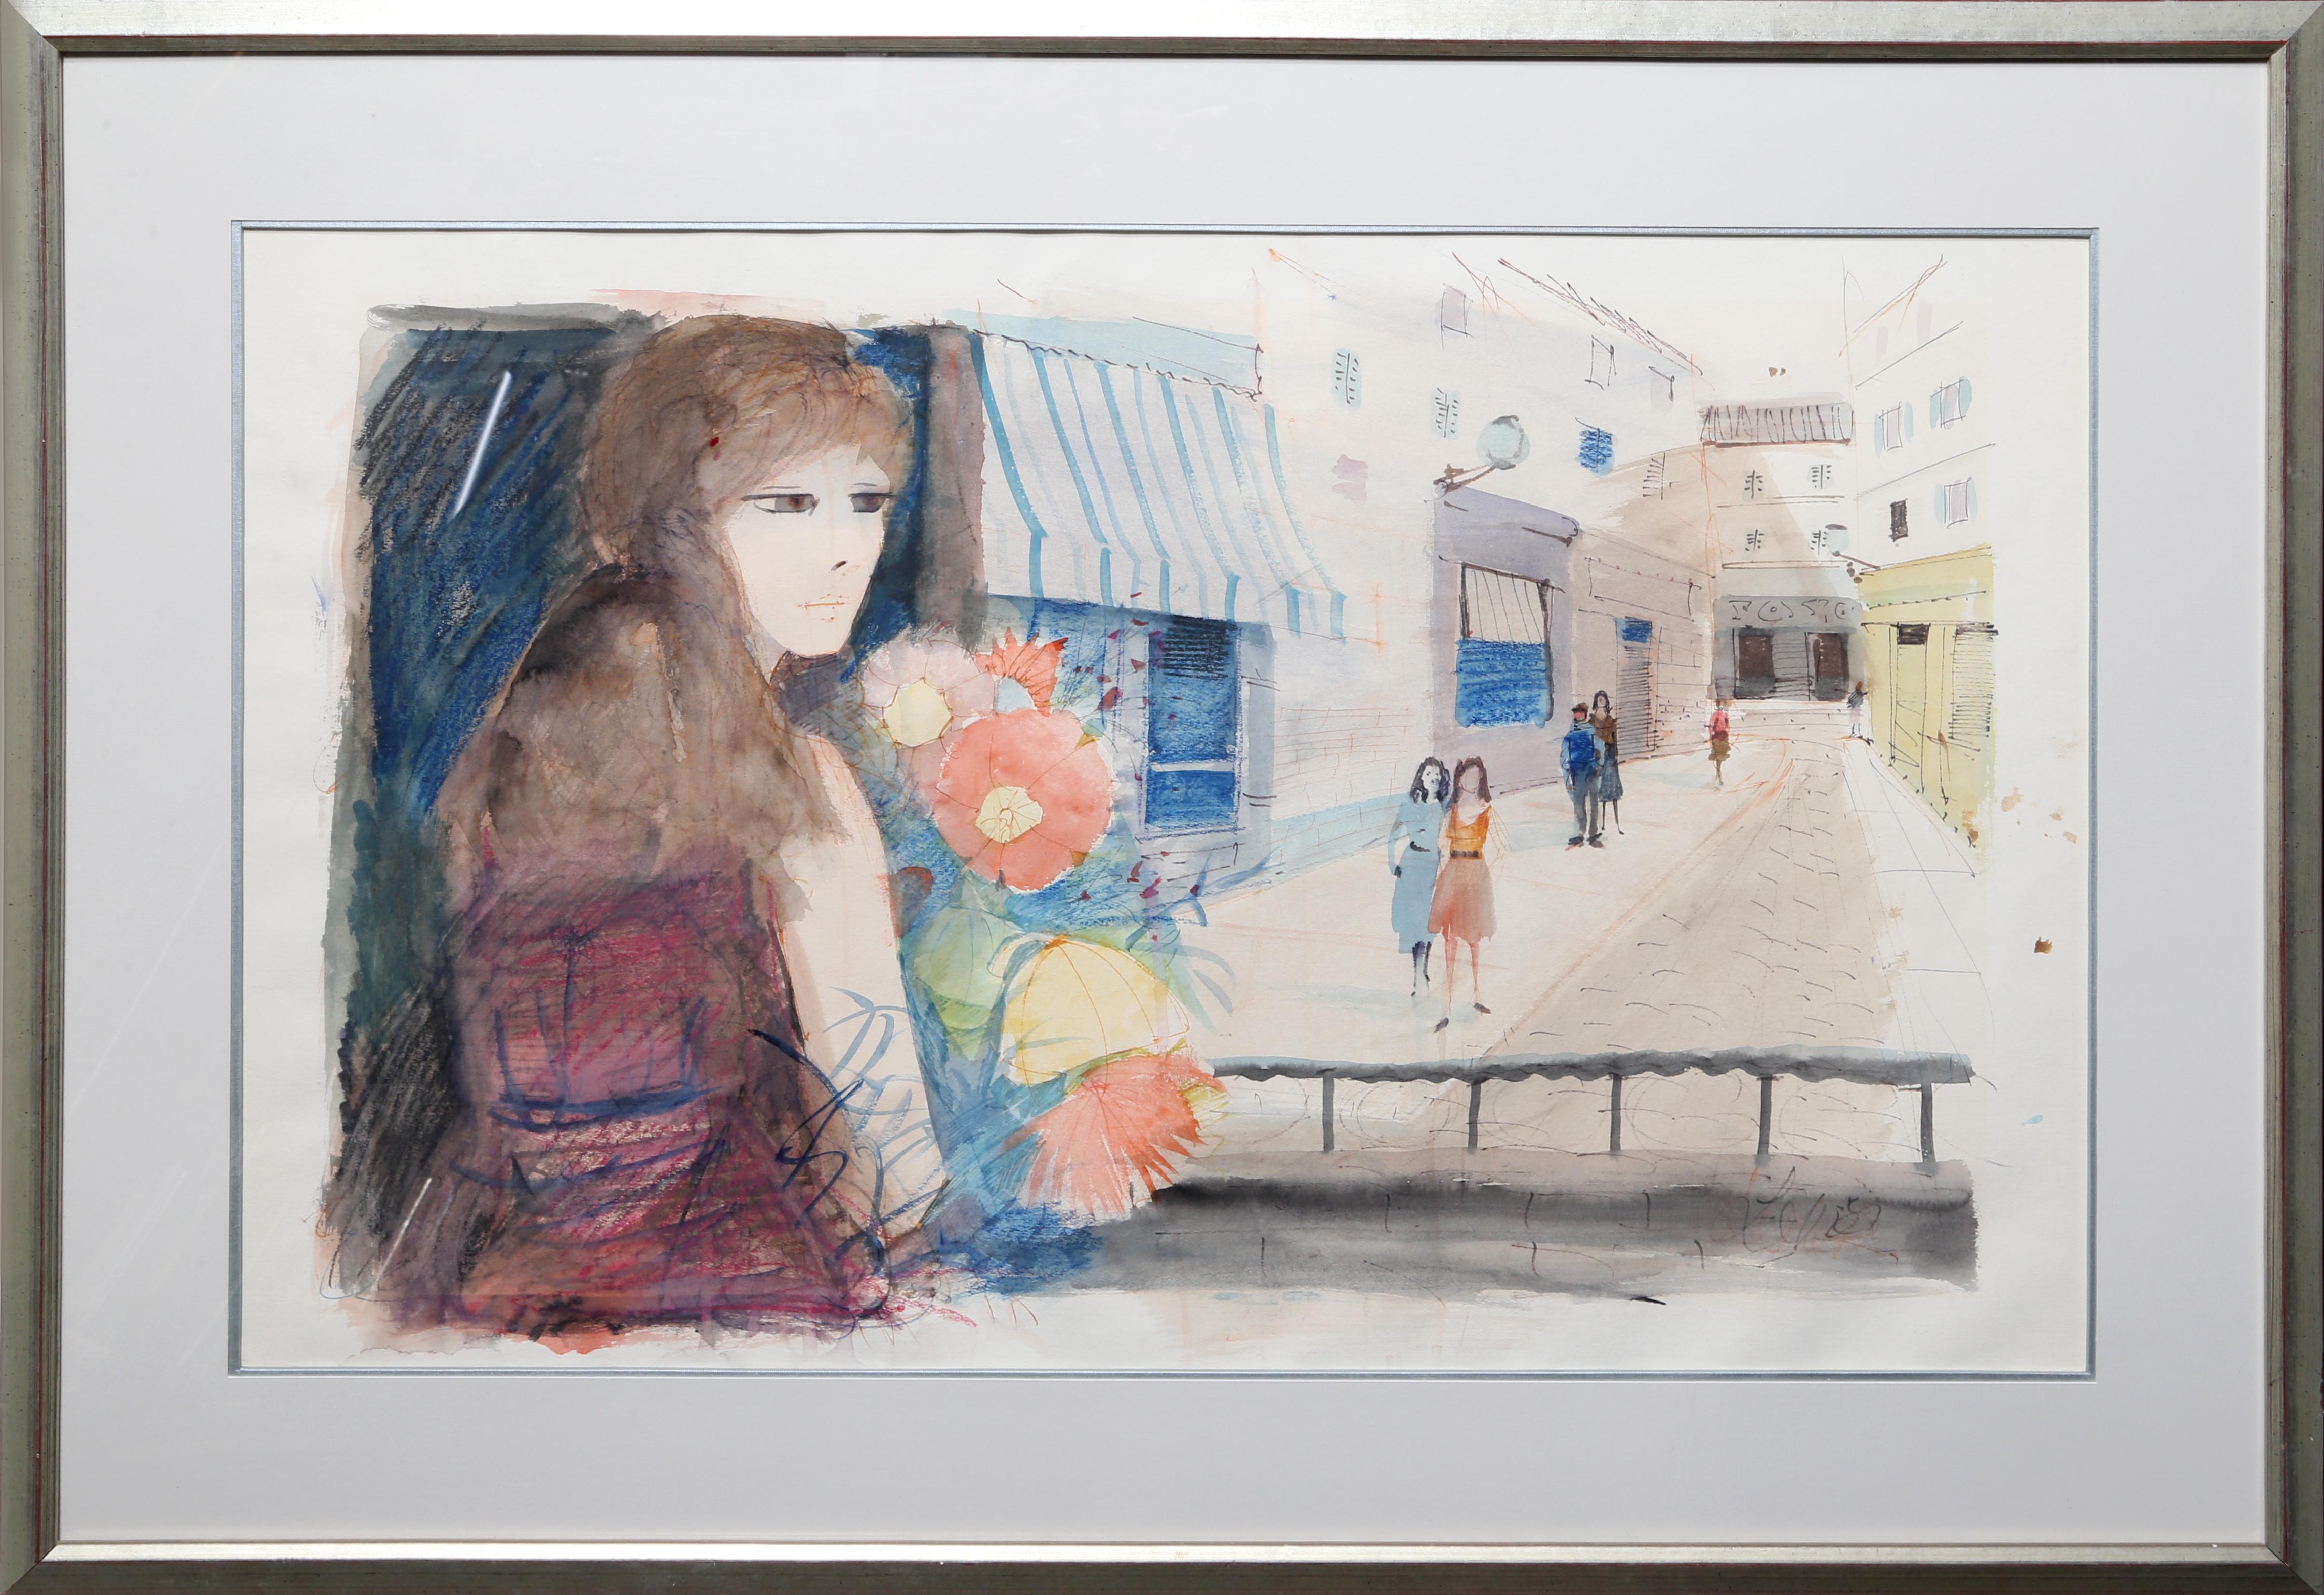 Artist: Charles Levier, French (1920 - 2003)
Title: Girl with Flowers
Year: circa 1970
Medium: Watercolor on Paper, signed
Image Size: 23 x 33.5 inches
Size: 26 in. x 36 in. (66.04 cm x 91.44 cm)
Frame Size: 32.5 x 37 inches